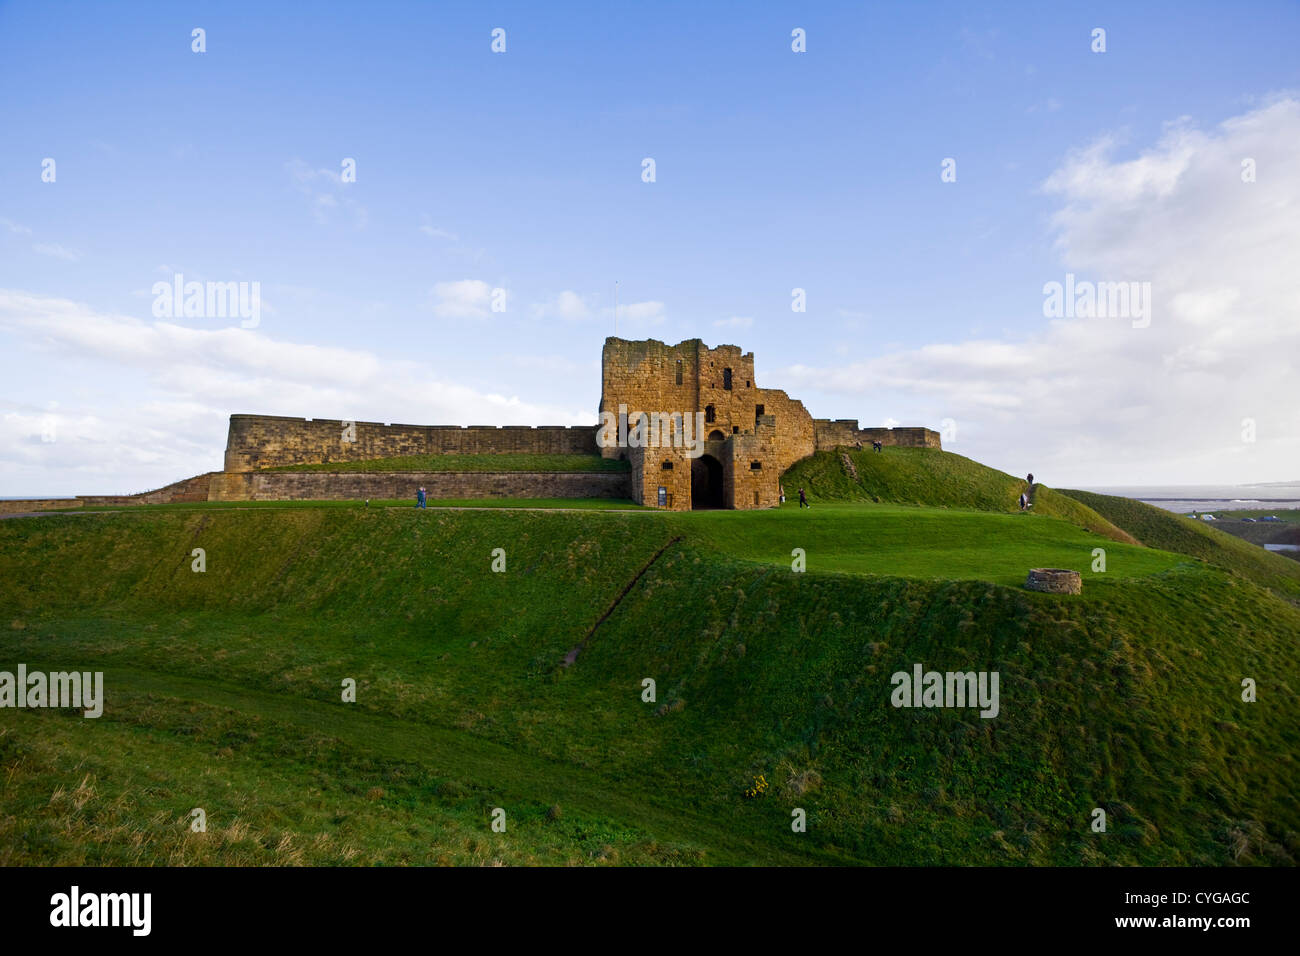 Tynemouth Castle Tynemouth Tyneside, UK Banque D'Images